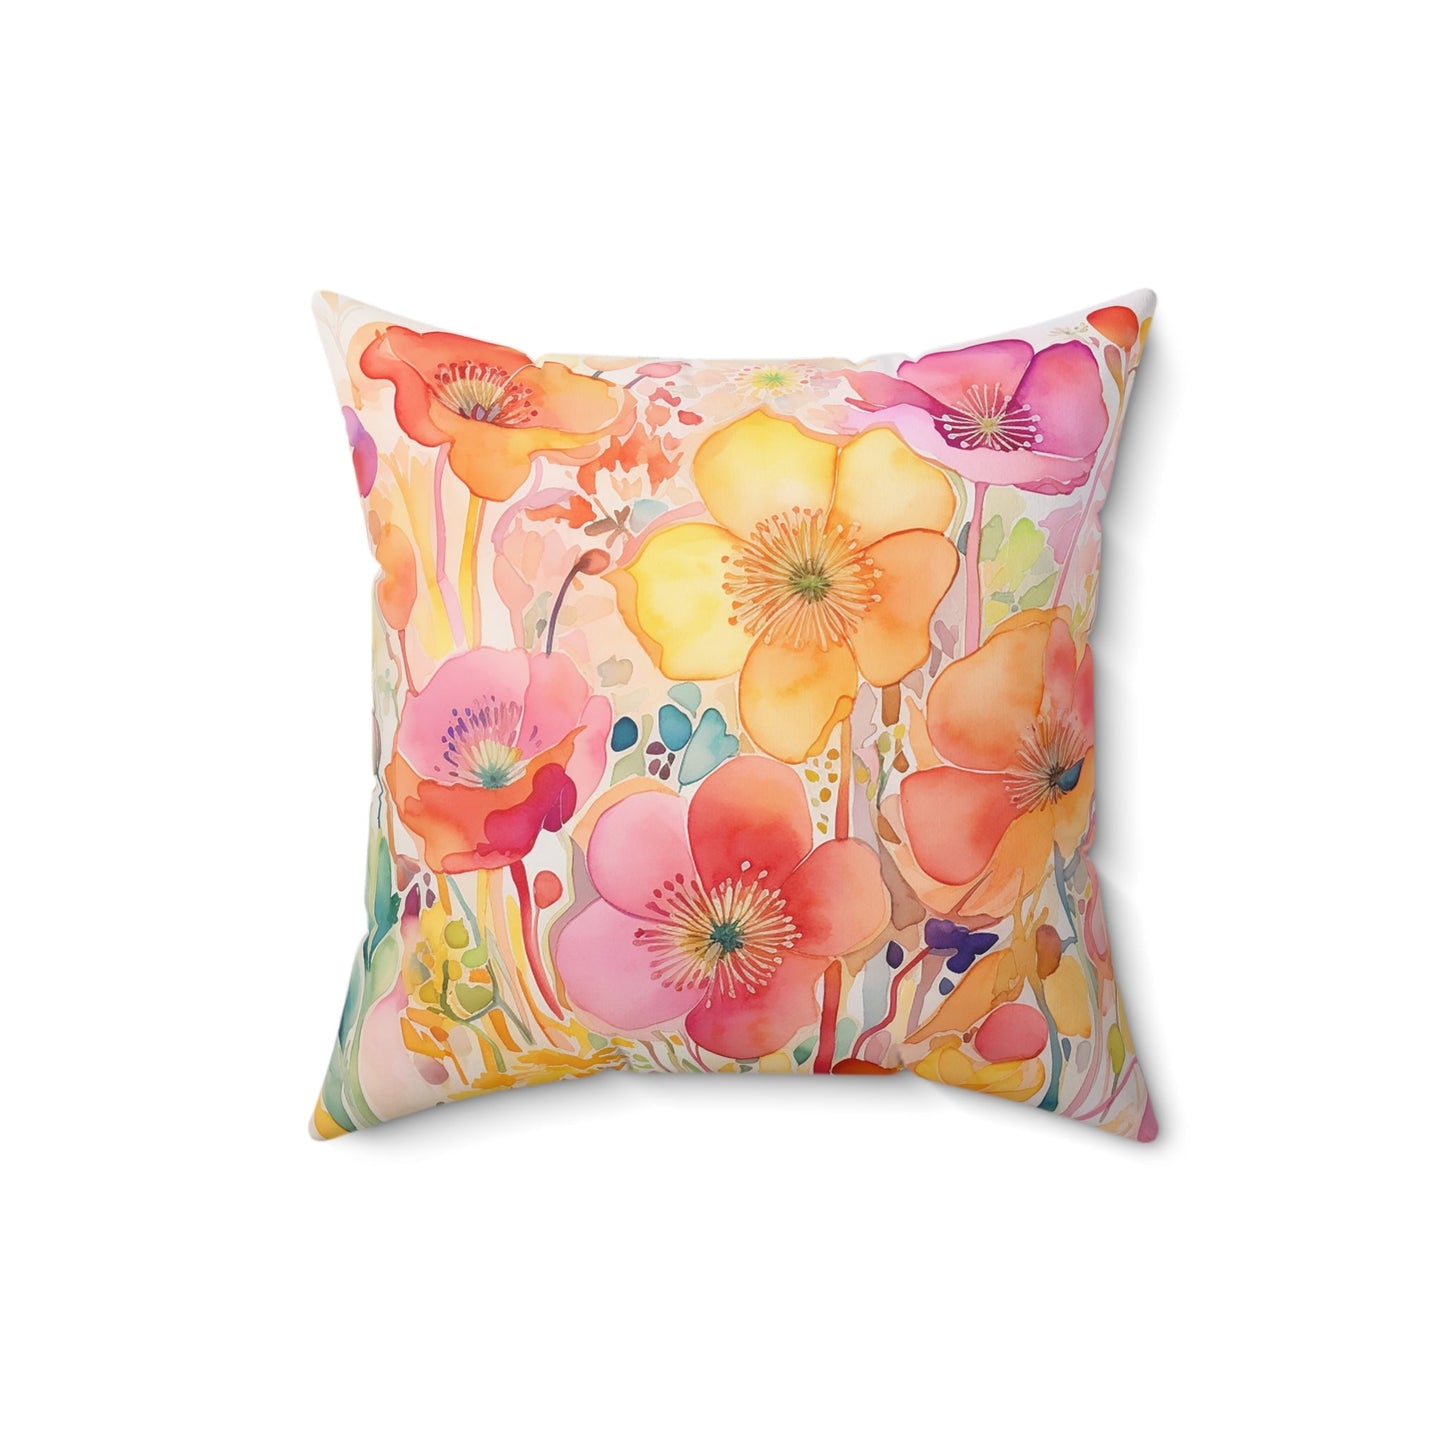 Original Wildflower Pillow, Watercolor, Bright Colors Pillow Cover, Floral Colors Pillow Cover, Useful Gift for Her, Spring Pillow Covers - FlooredByArt